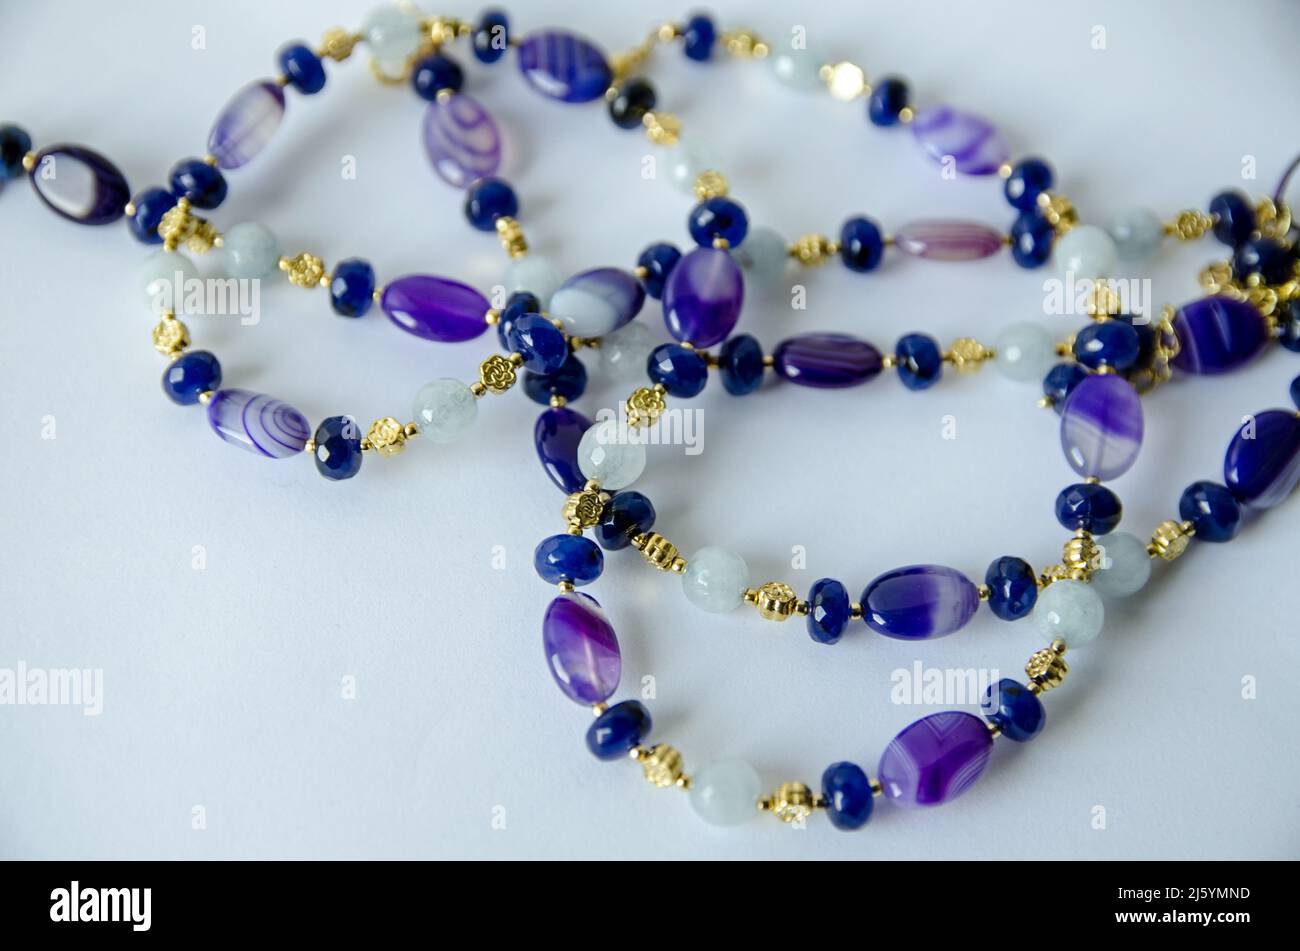 A necklace handmade from beads of aquamarine, purple agate and blue quartz interstrung with gold plated beads and coiled on a white surface showing so Stock Photo